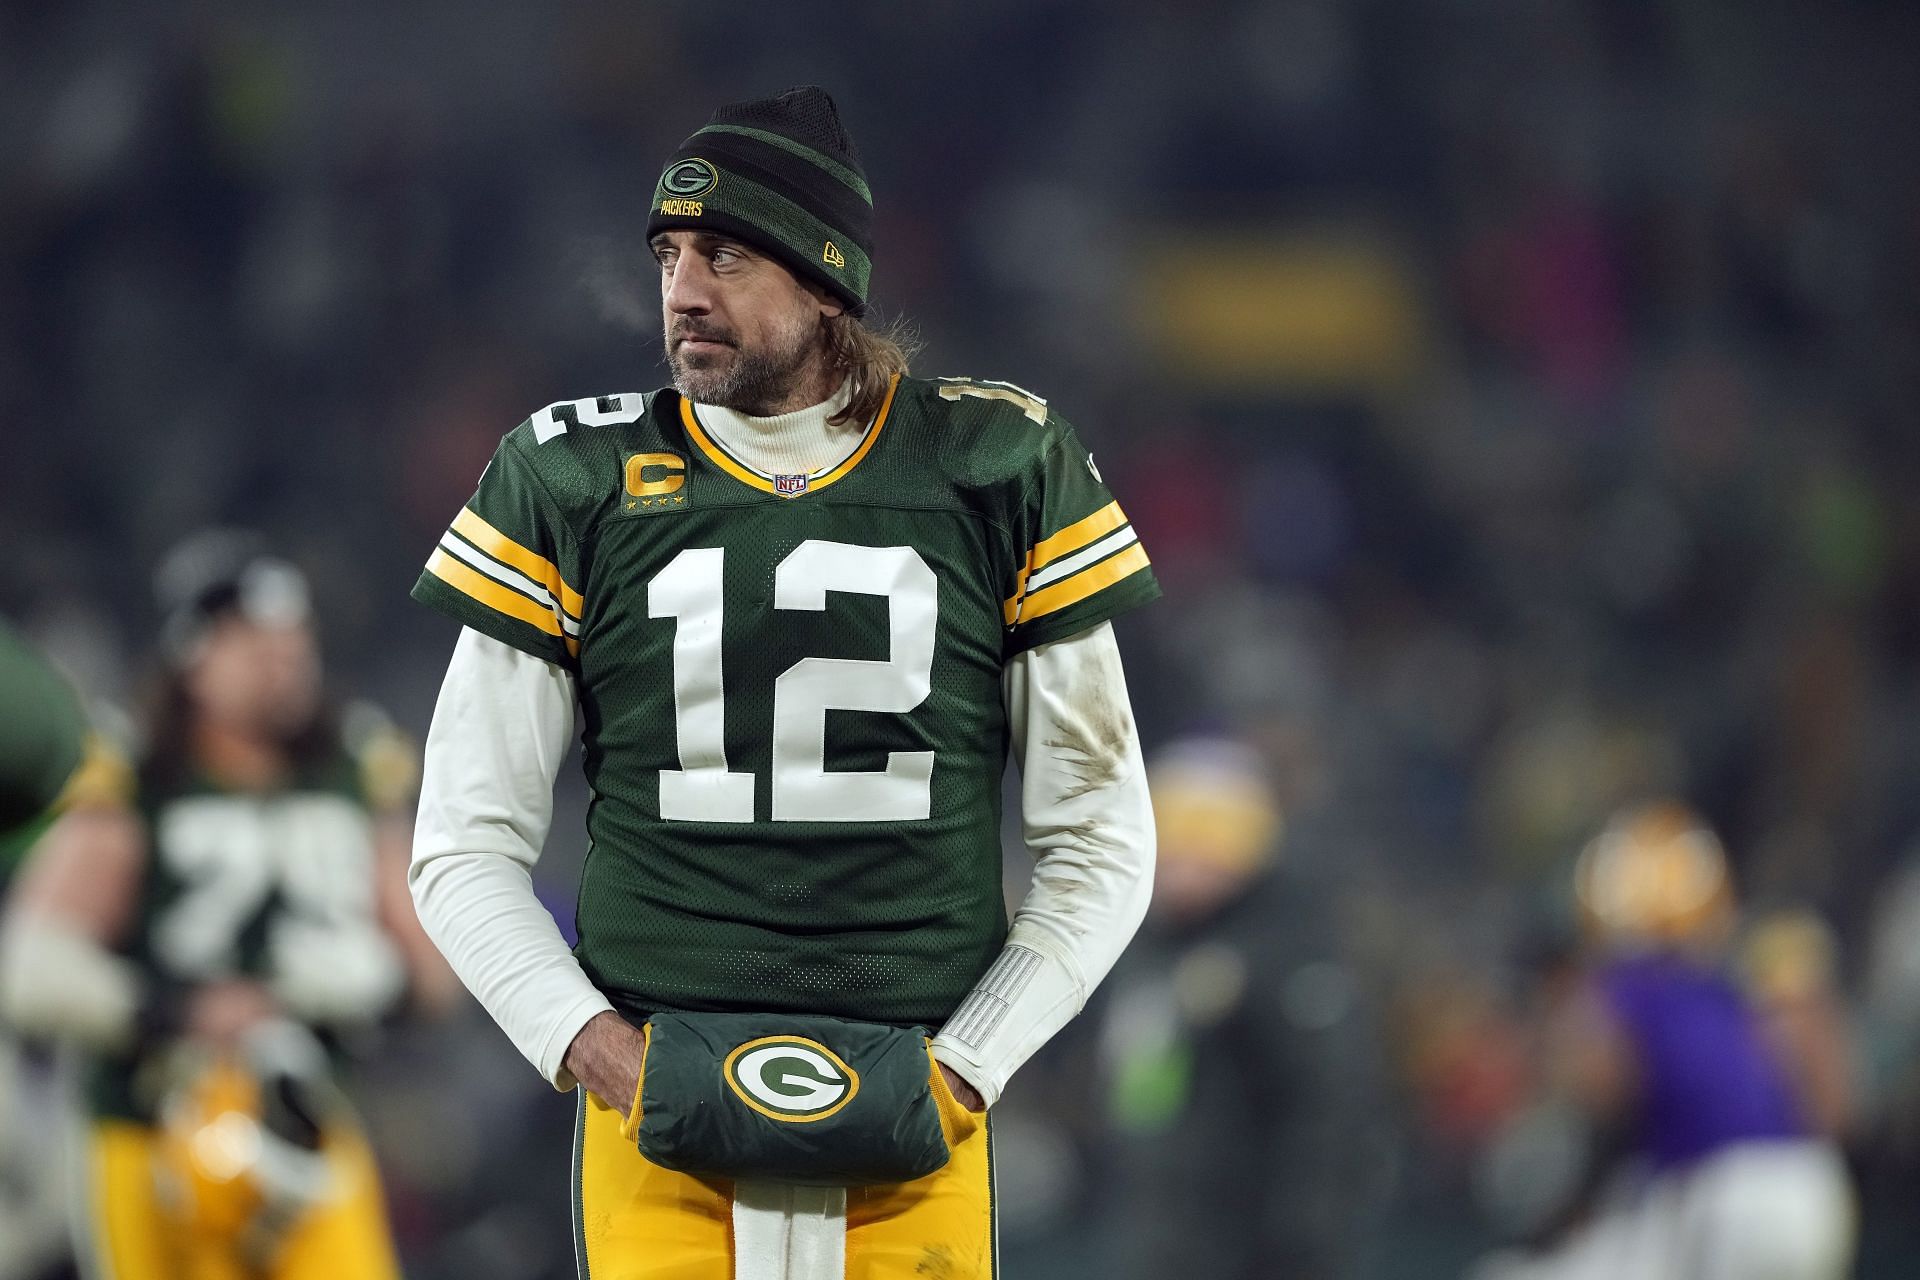 Green Bay Packers quarterback Aaron Rodgers warming up before a game against the Minnesota Vikings